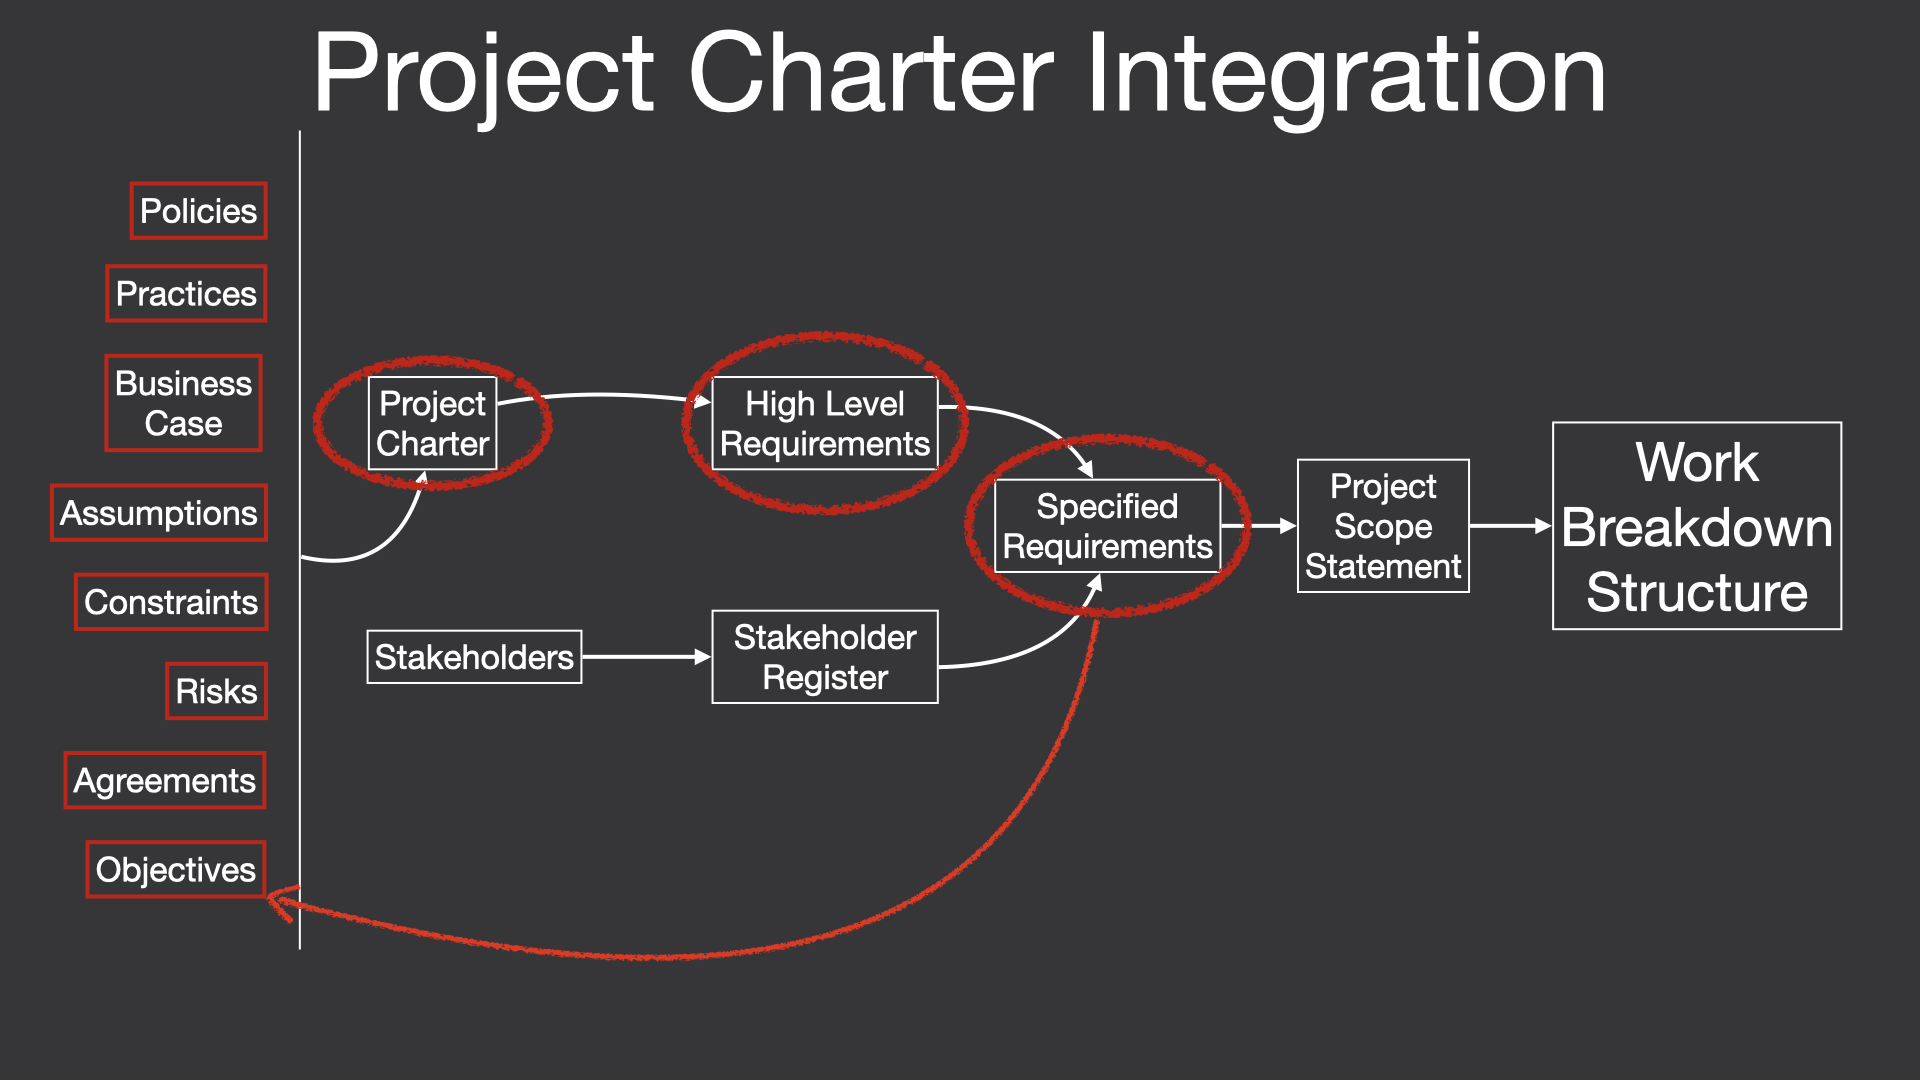 Project management charter helps to link requirements and scope of a project to its objectives.